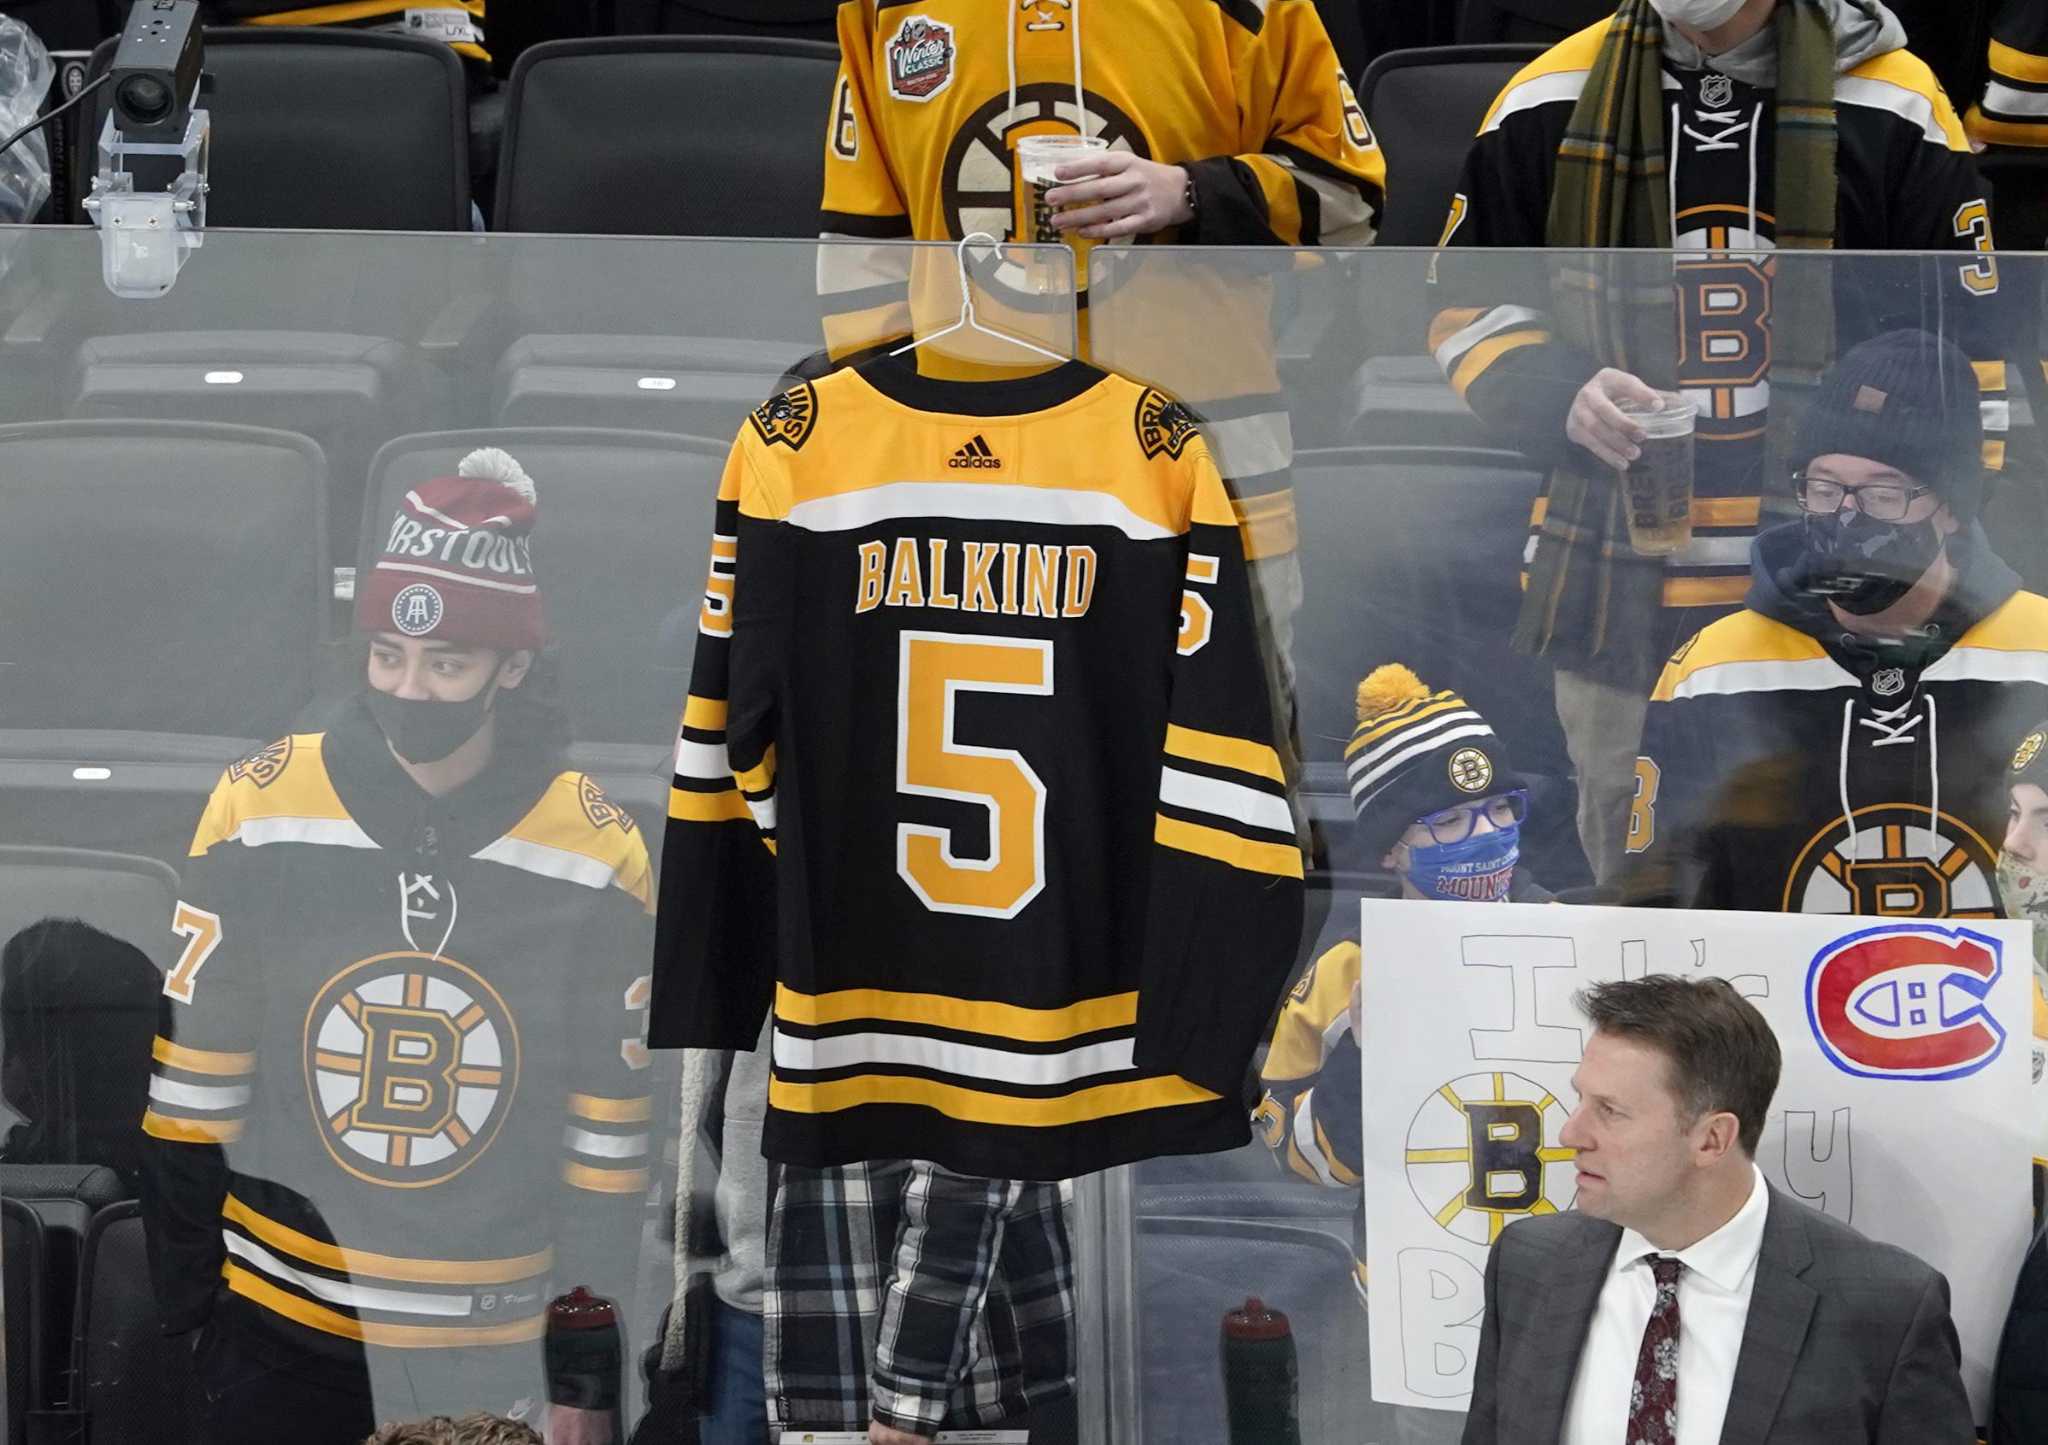 Boston Bruins on X: The Boston Bruins are proud to honor Dit